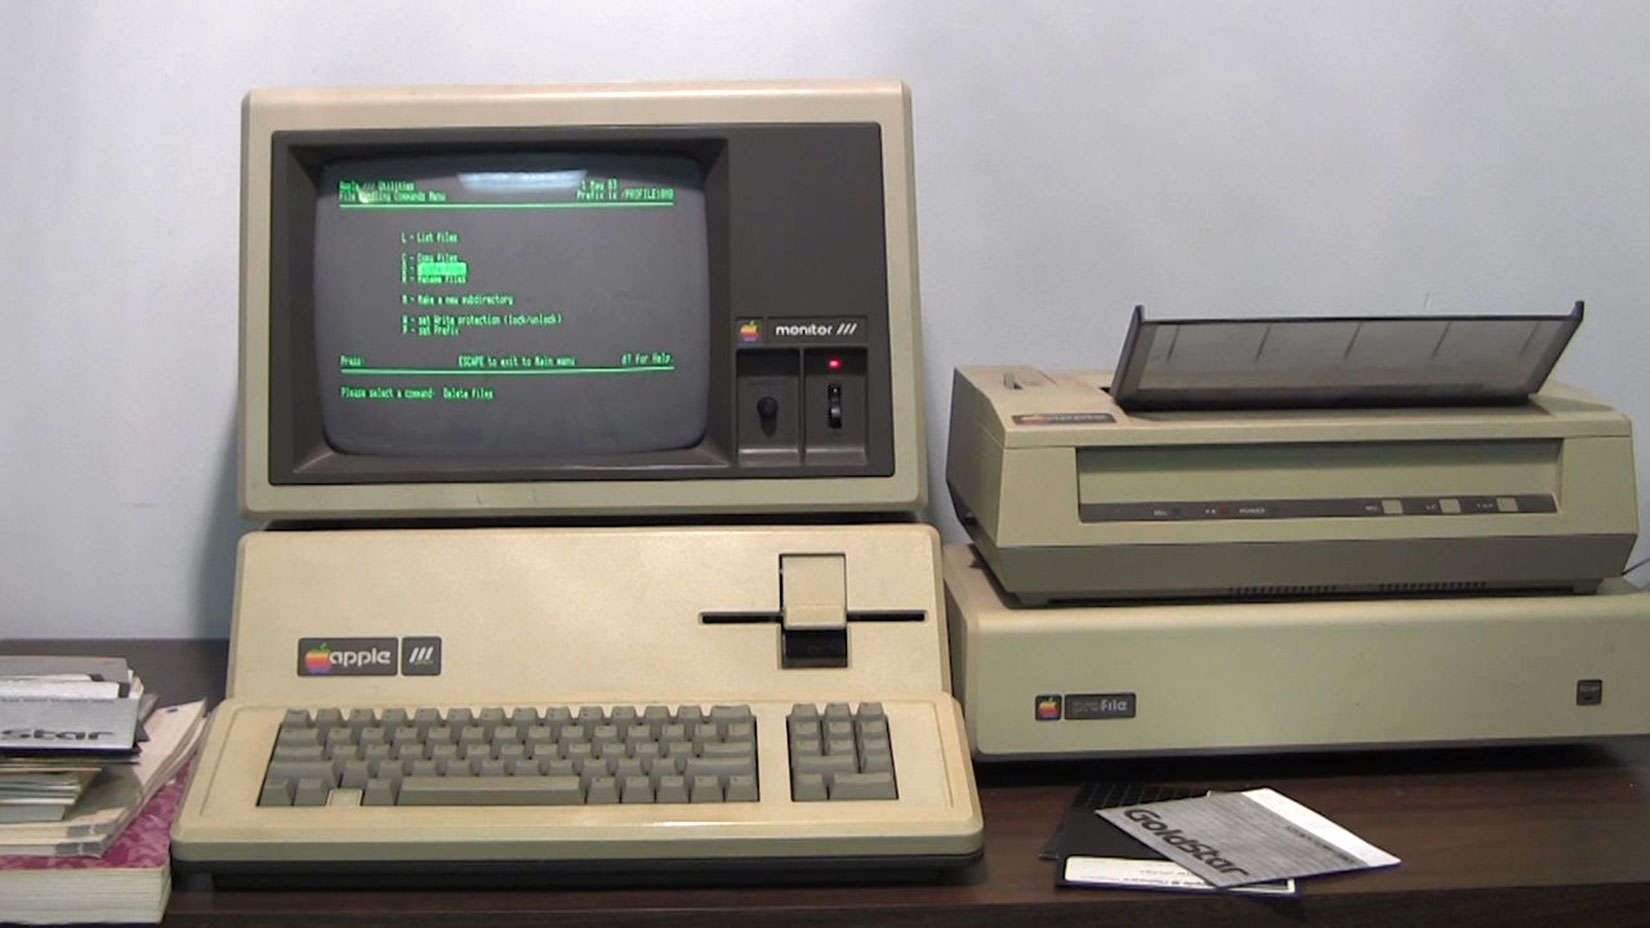 This Apple III Plus still works after spending the 1980s scheduling yoga classes at a spiritual retreat center.